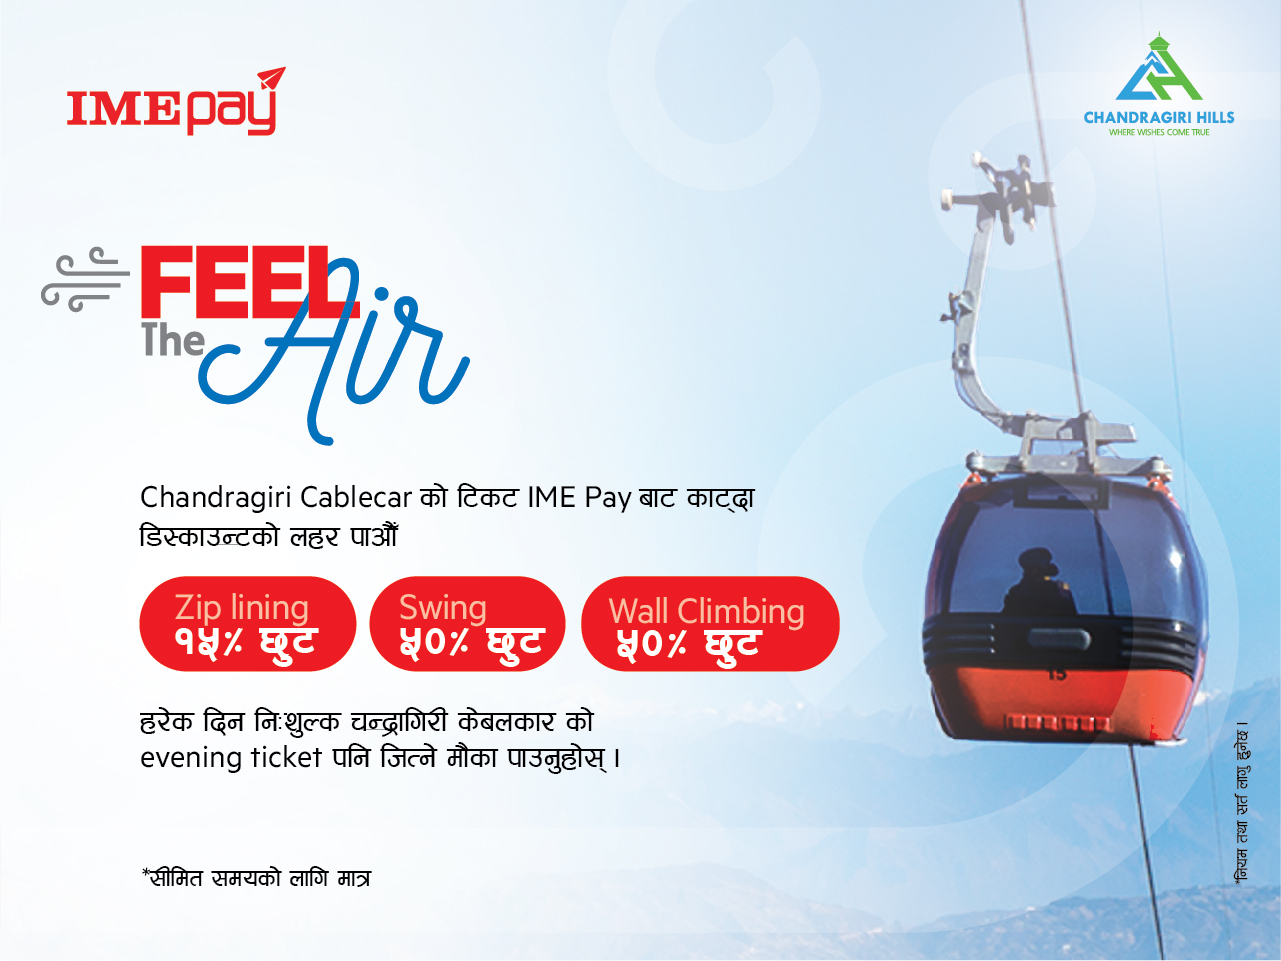 IME Pay & Chandragiri Hillswitch agreed to grant discount on Valentine’s Day feel air offer